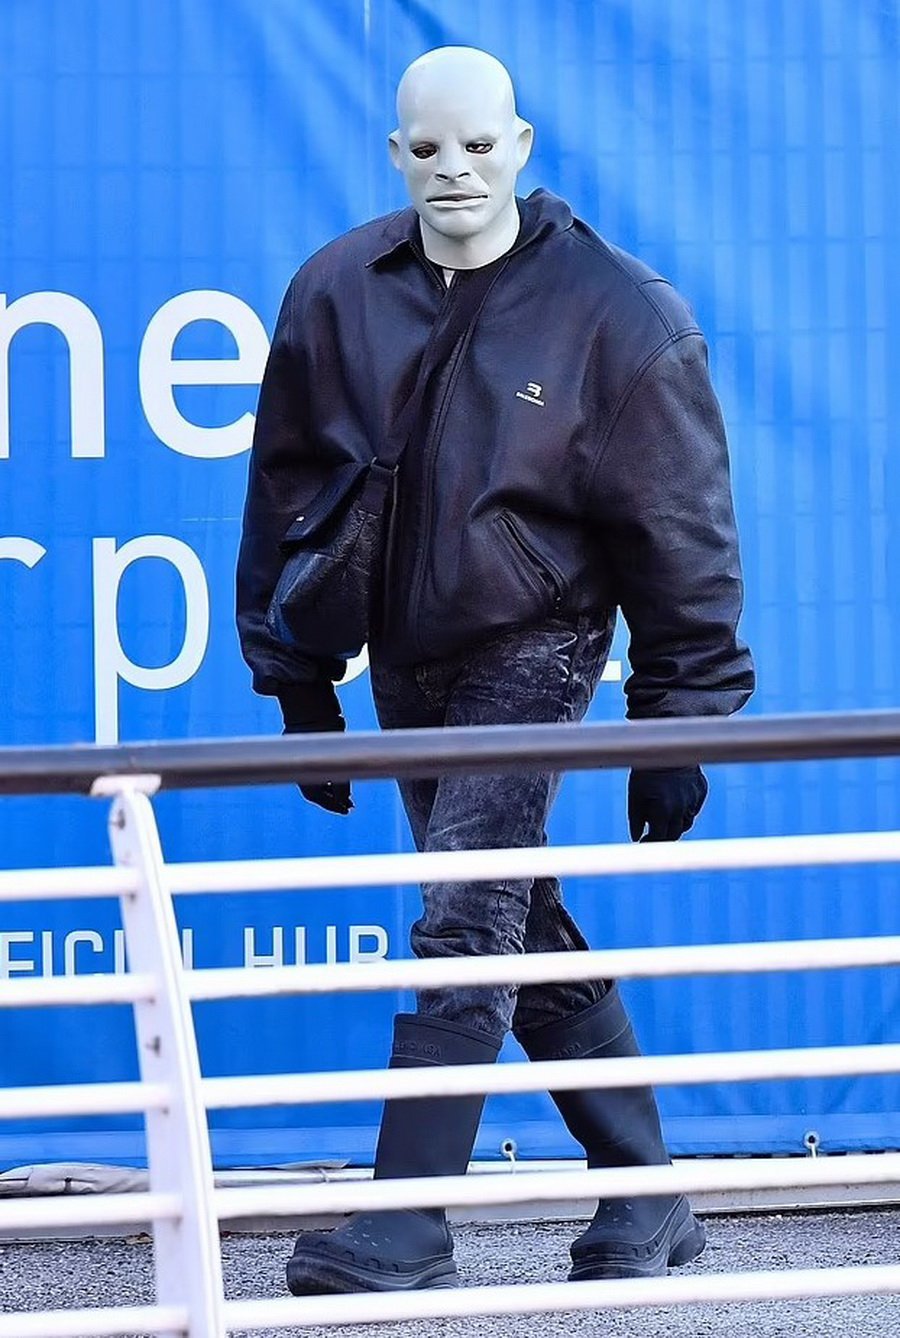 Fans worried about Kanye West's mental health - He walks with bizarre rubber face masks